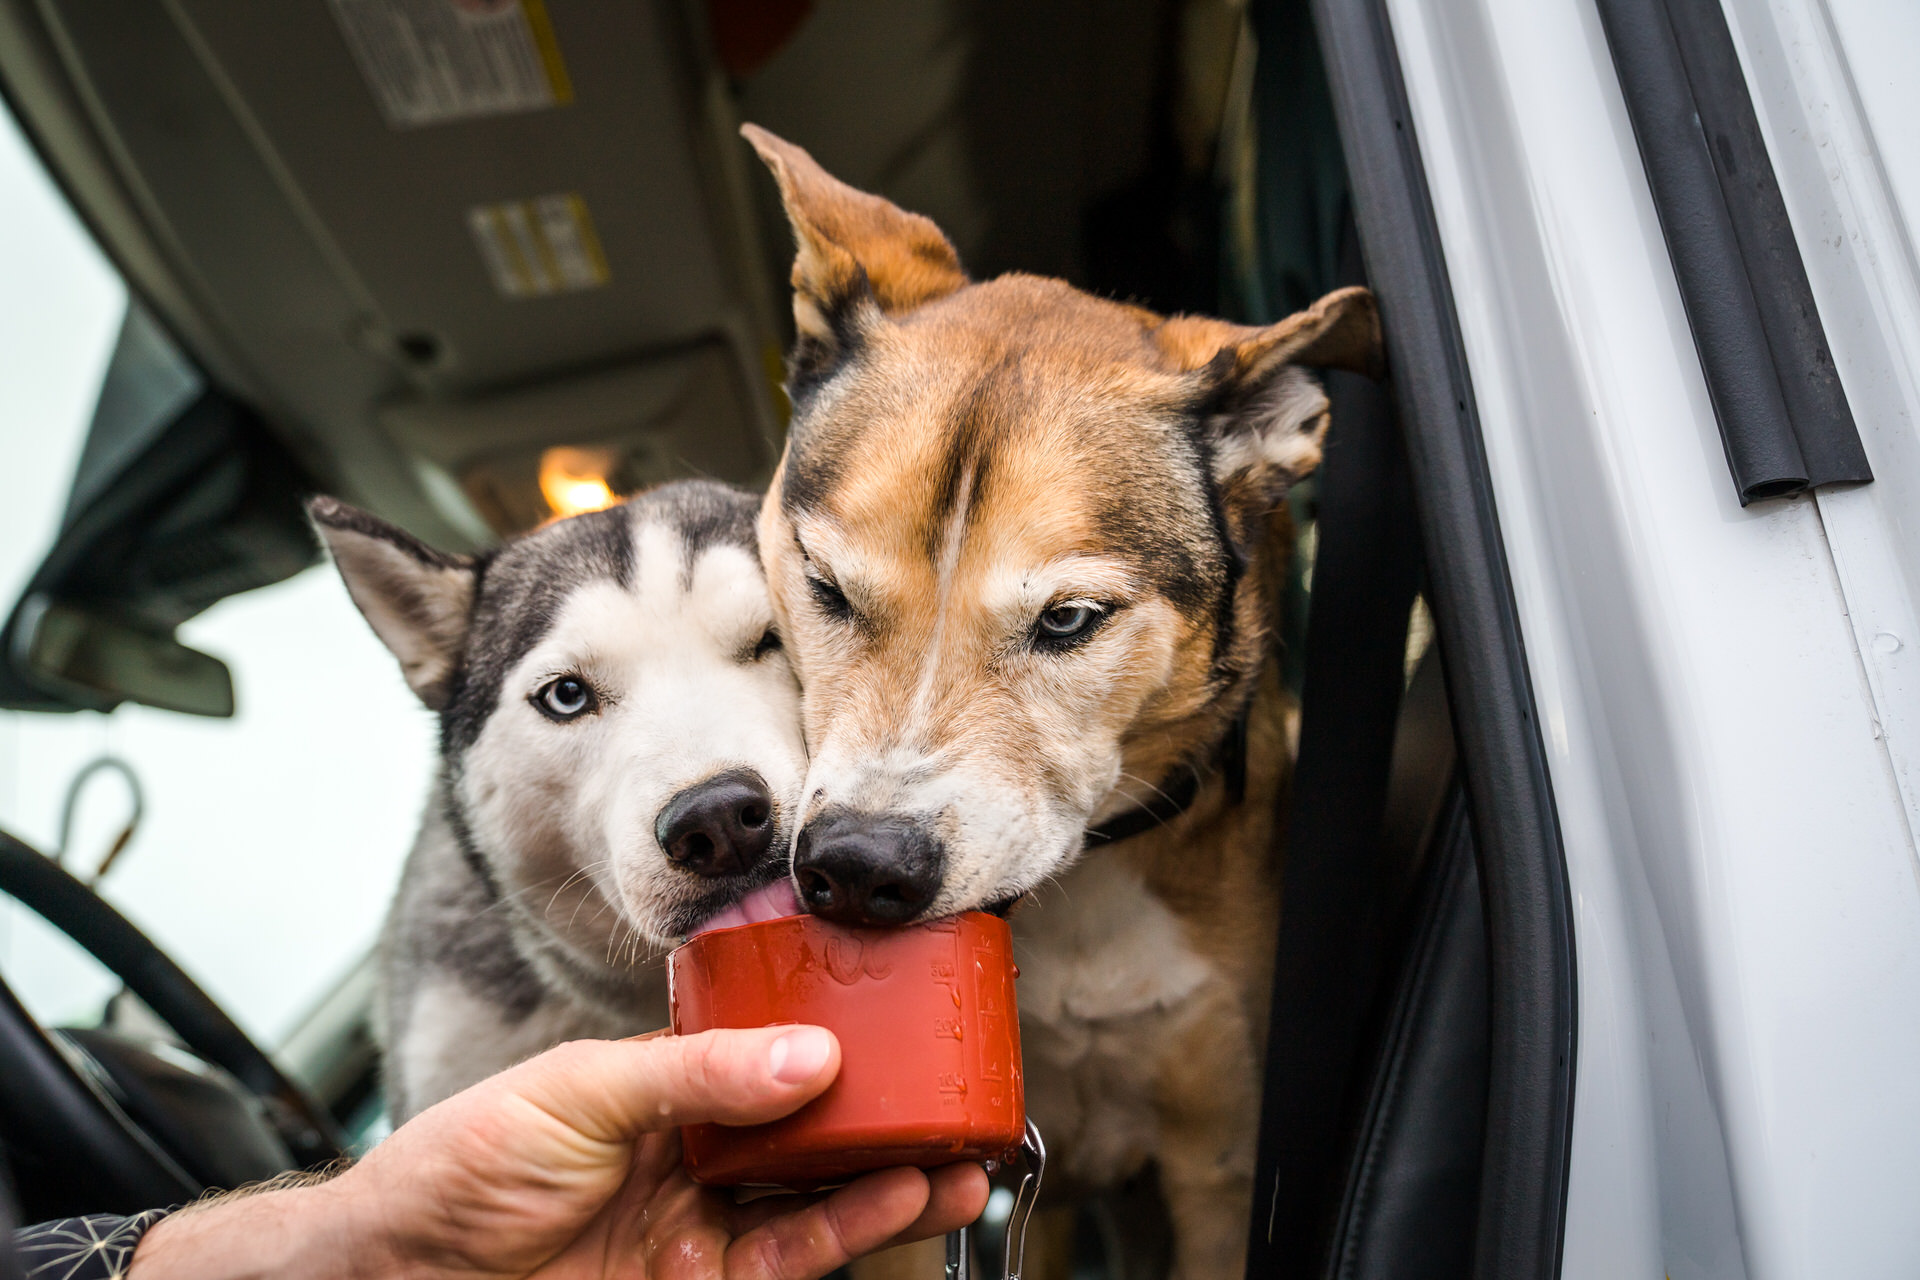 dogs drinking out of a cup together